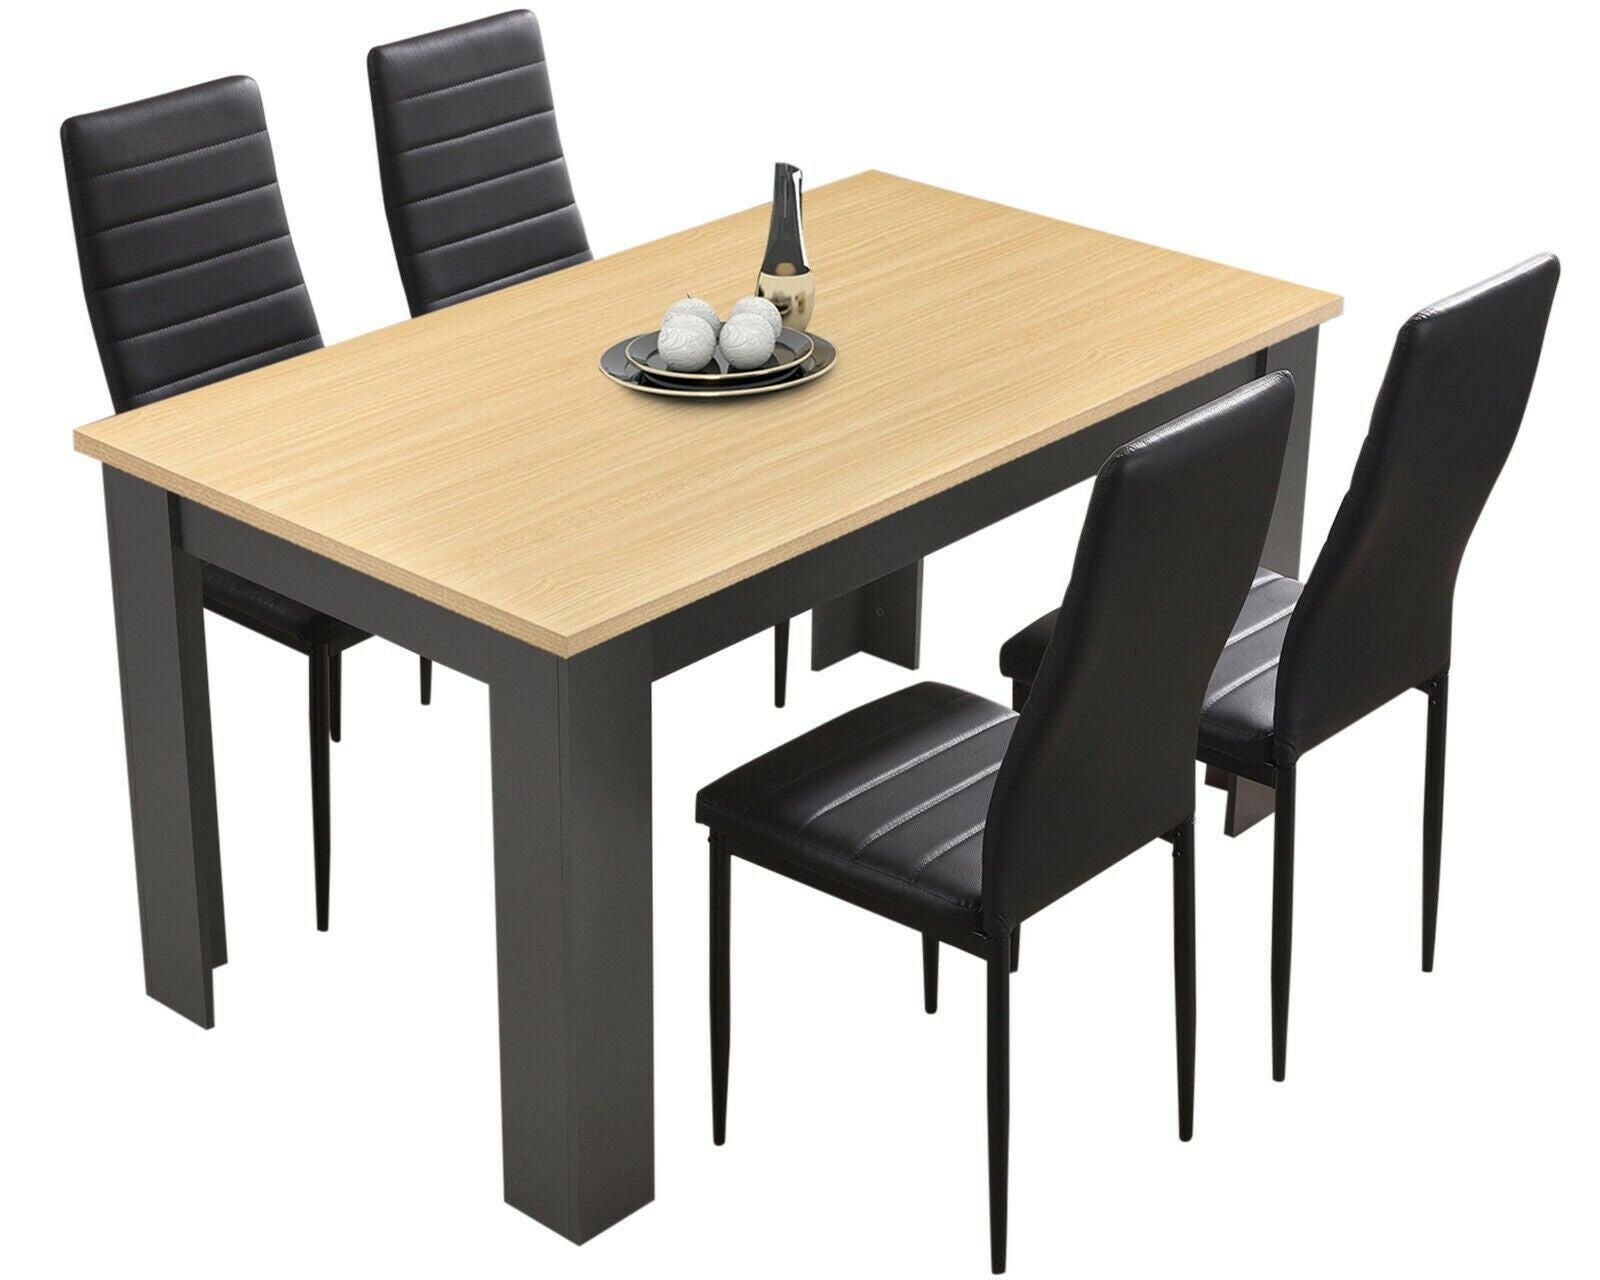 space saving dining table and chairs